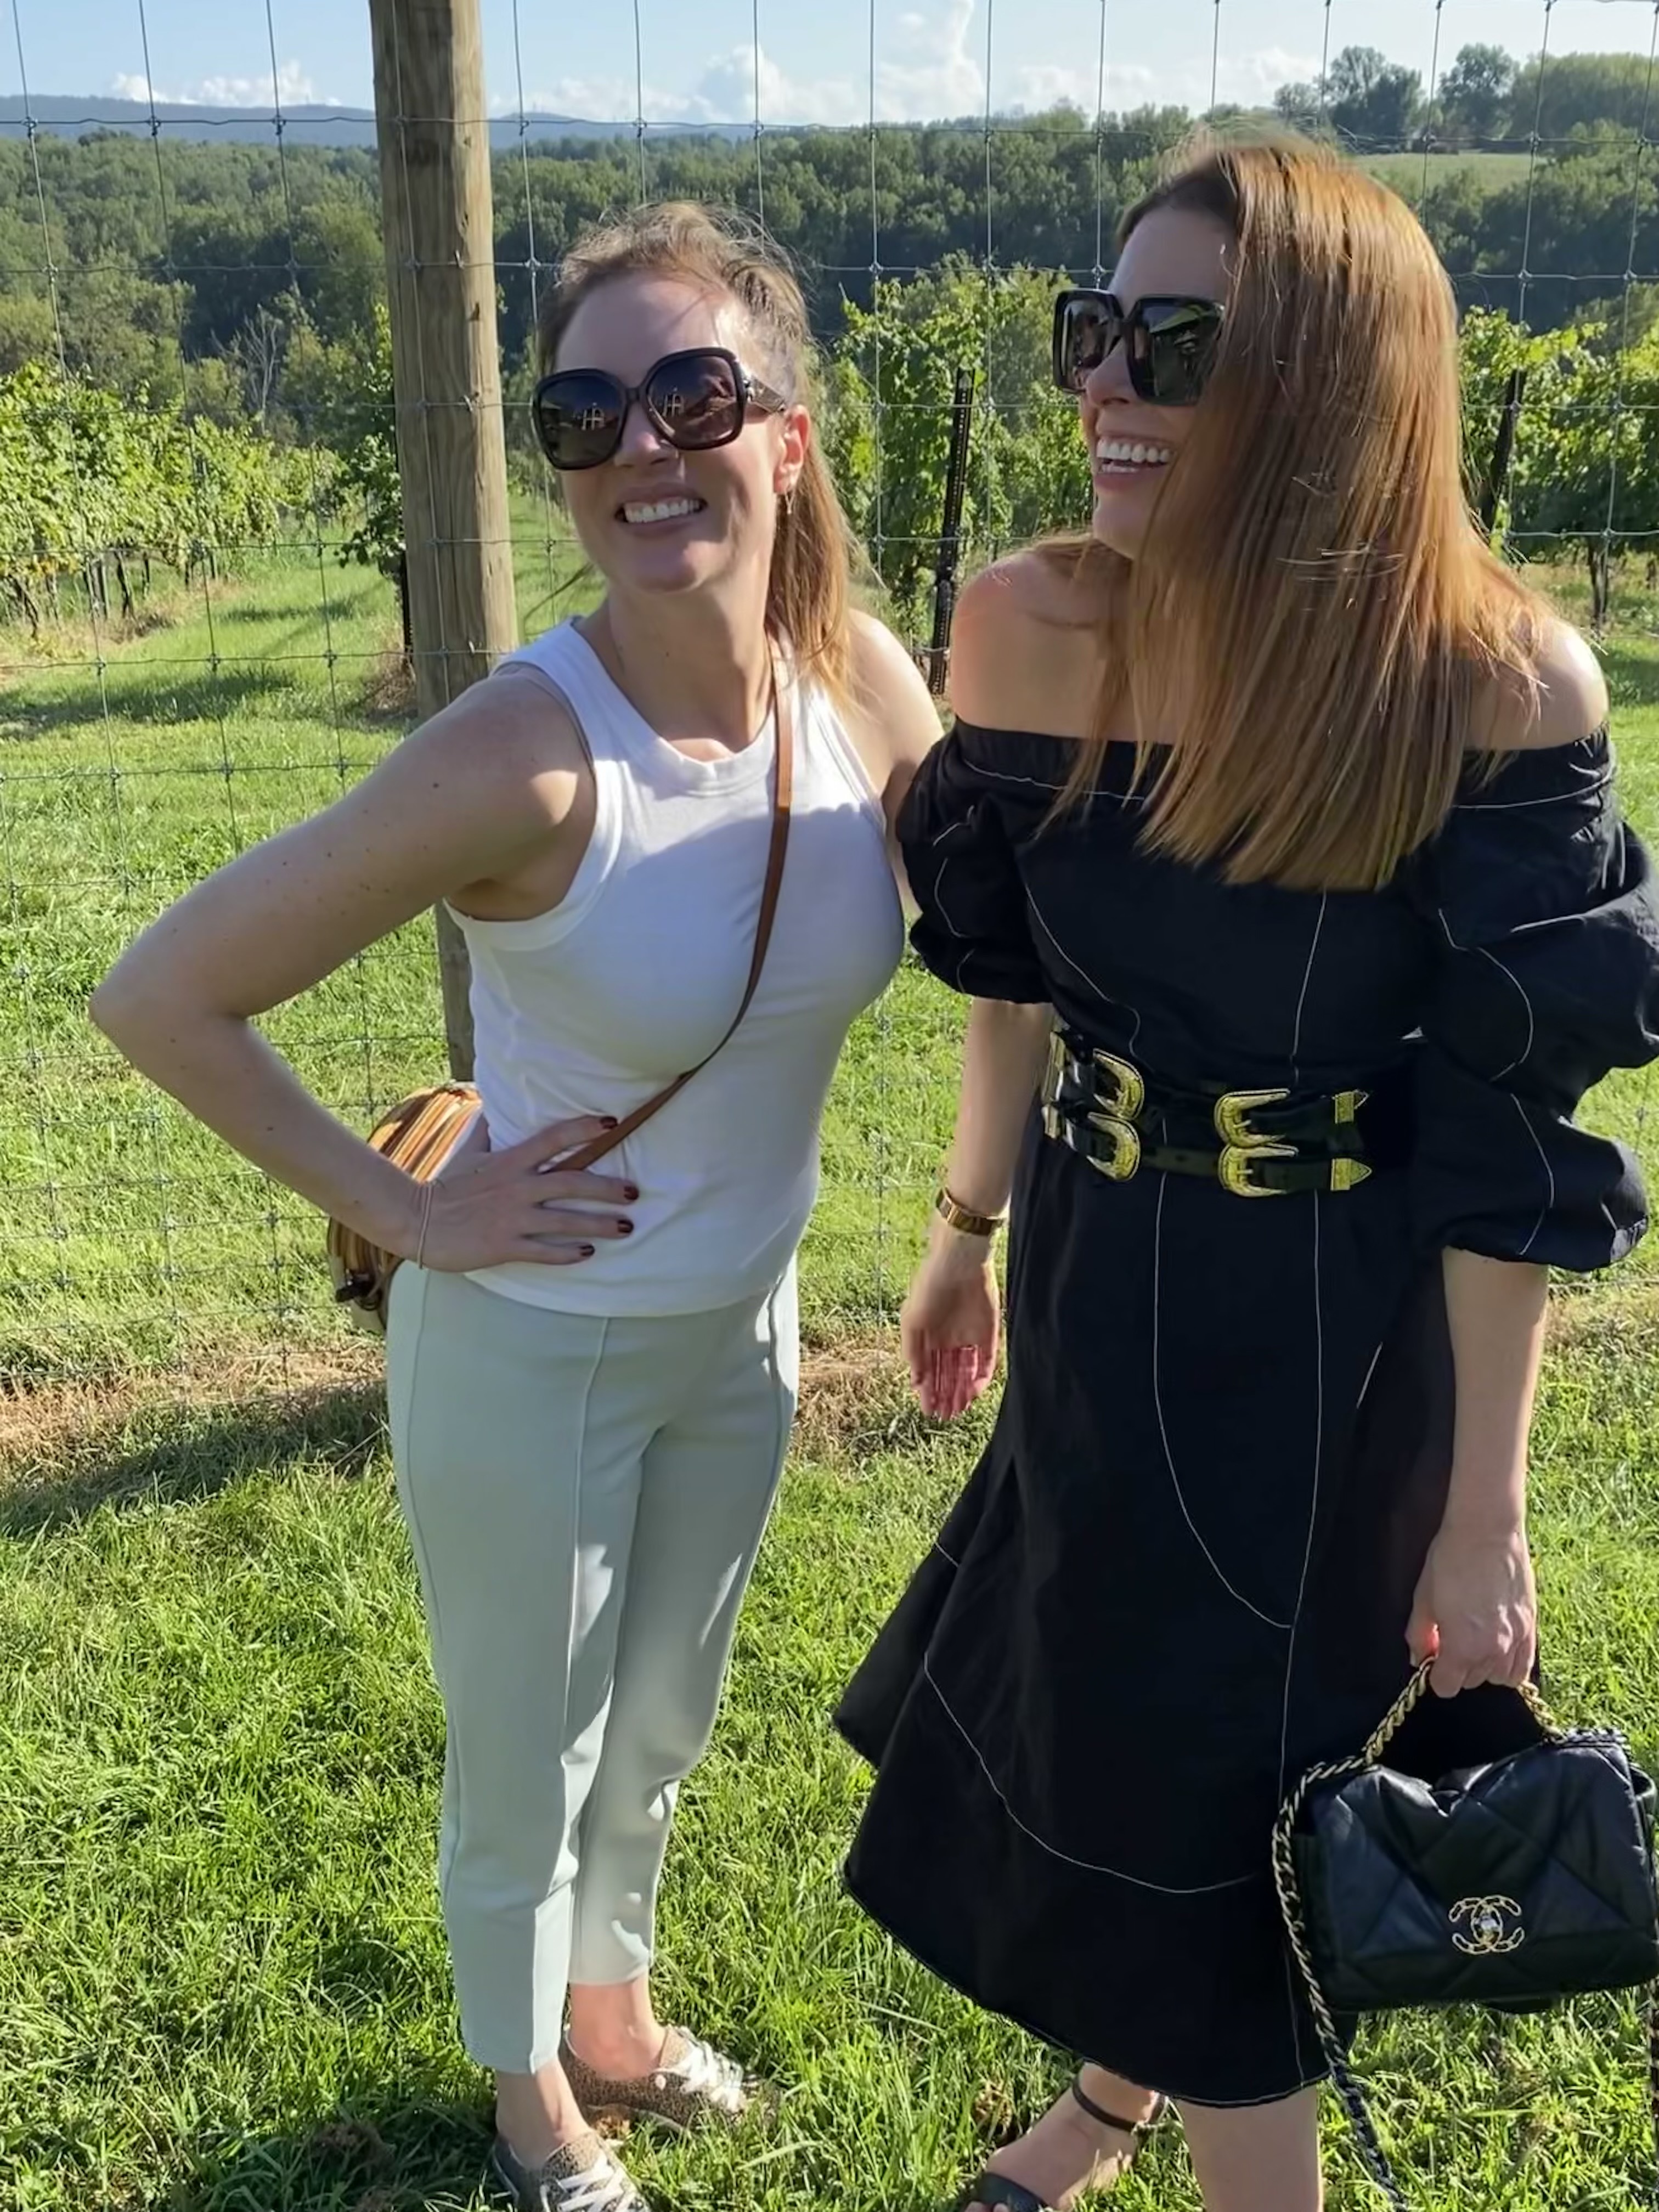 Two women smiling and laughing at a vineyard